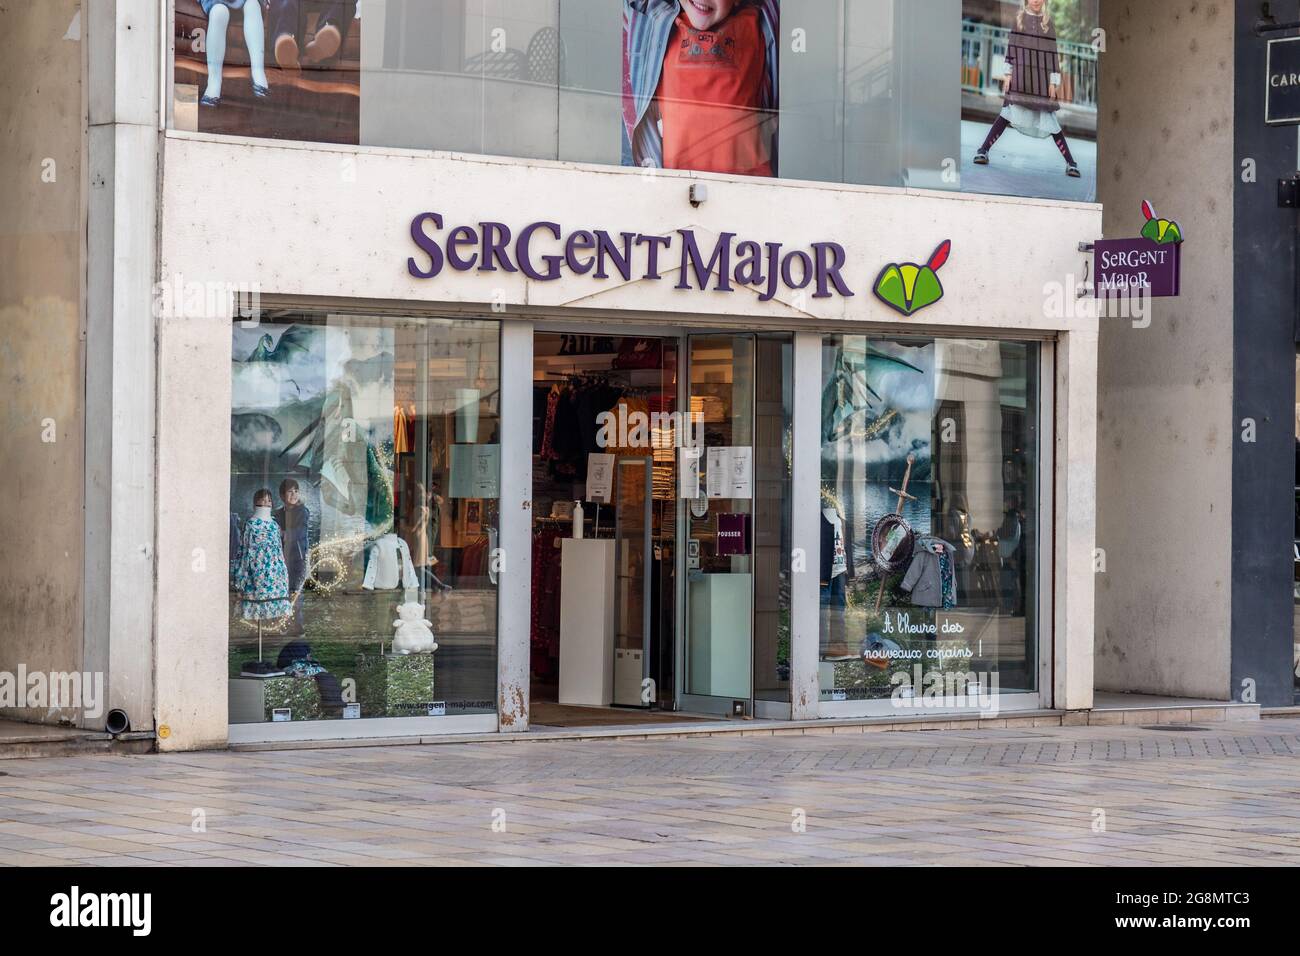 TOURS, FRANCE Jul 12, 2021 The Sergent Major storefront on a busy